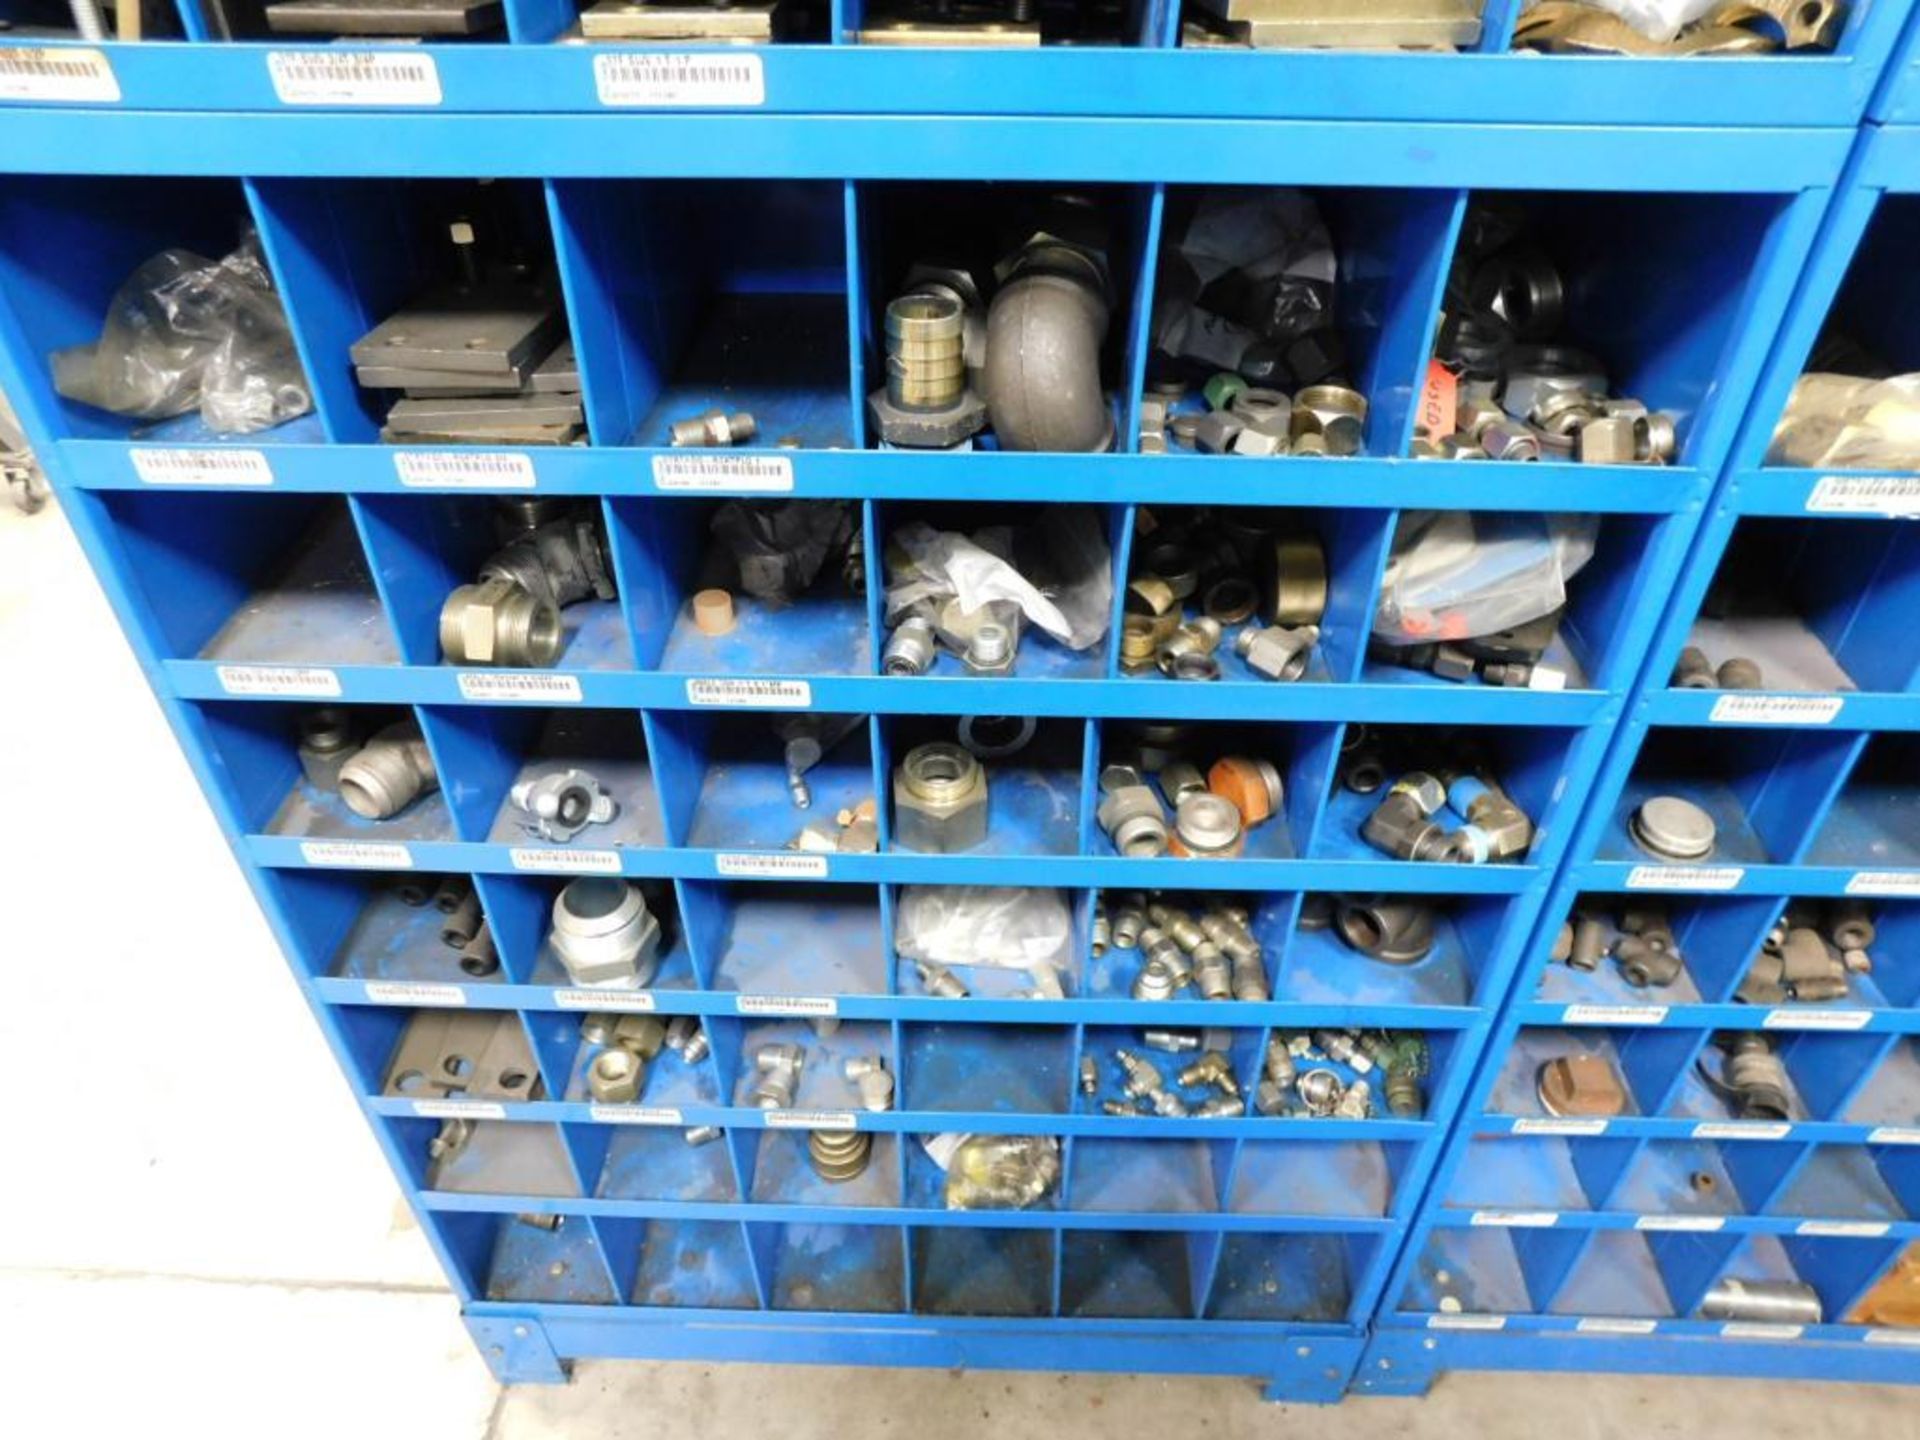 LOT: (7) Sections Fastenal Compartment Organizers w/Contents of Hardware, Plumbing, etc. - Image 4 of 15